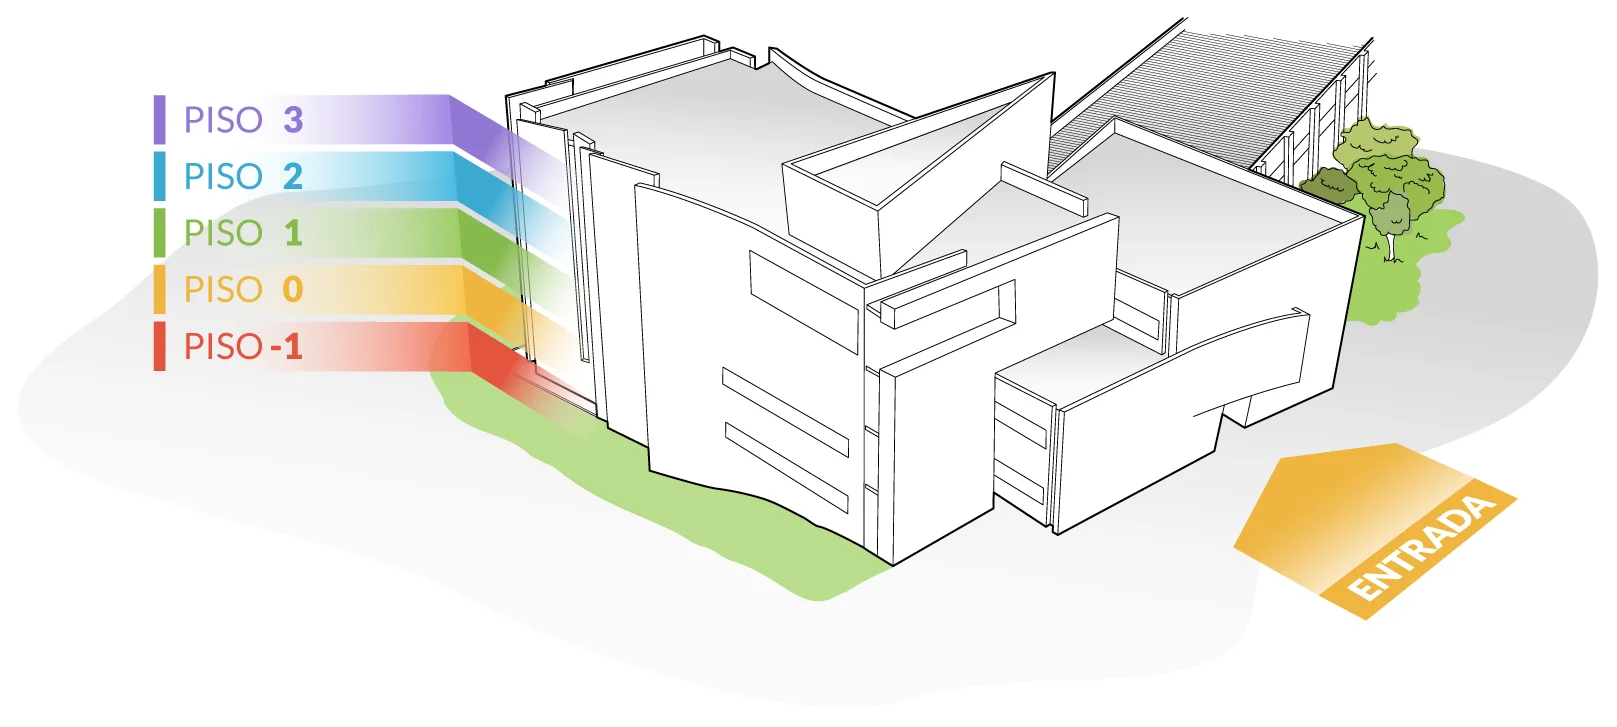 3D diagram of the FCNAUP building, showing the 5 floors and the main entrance.